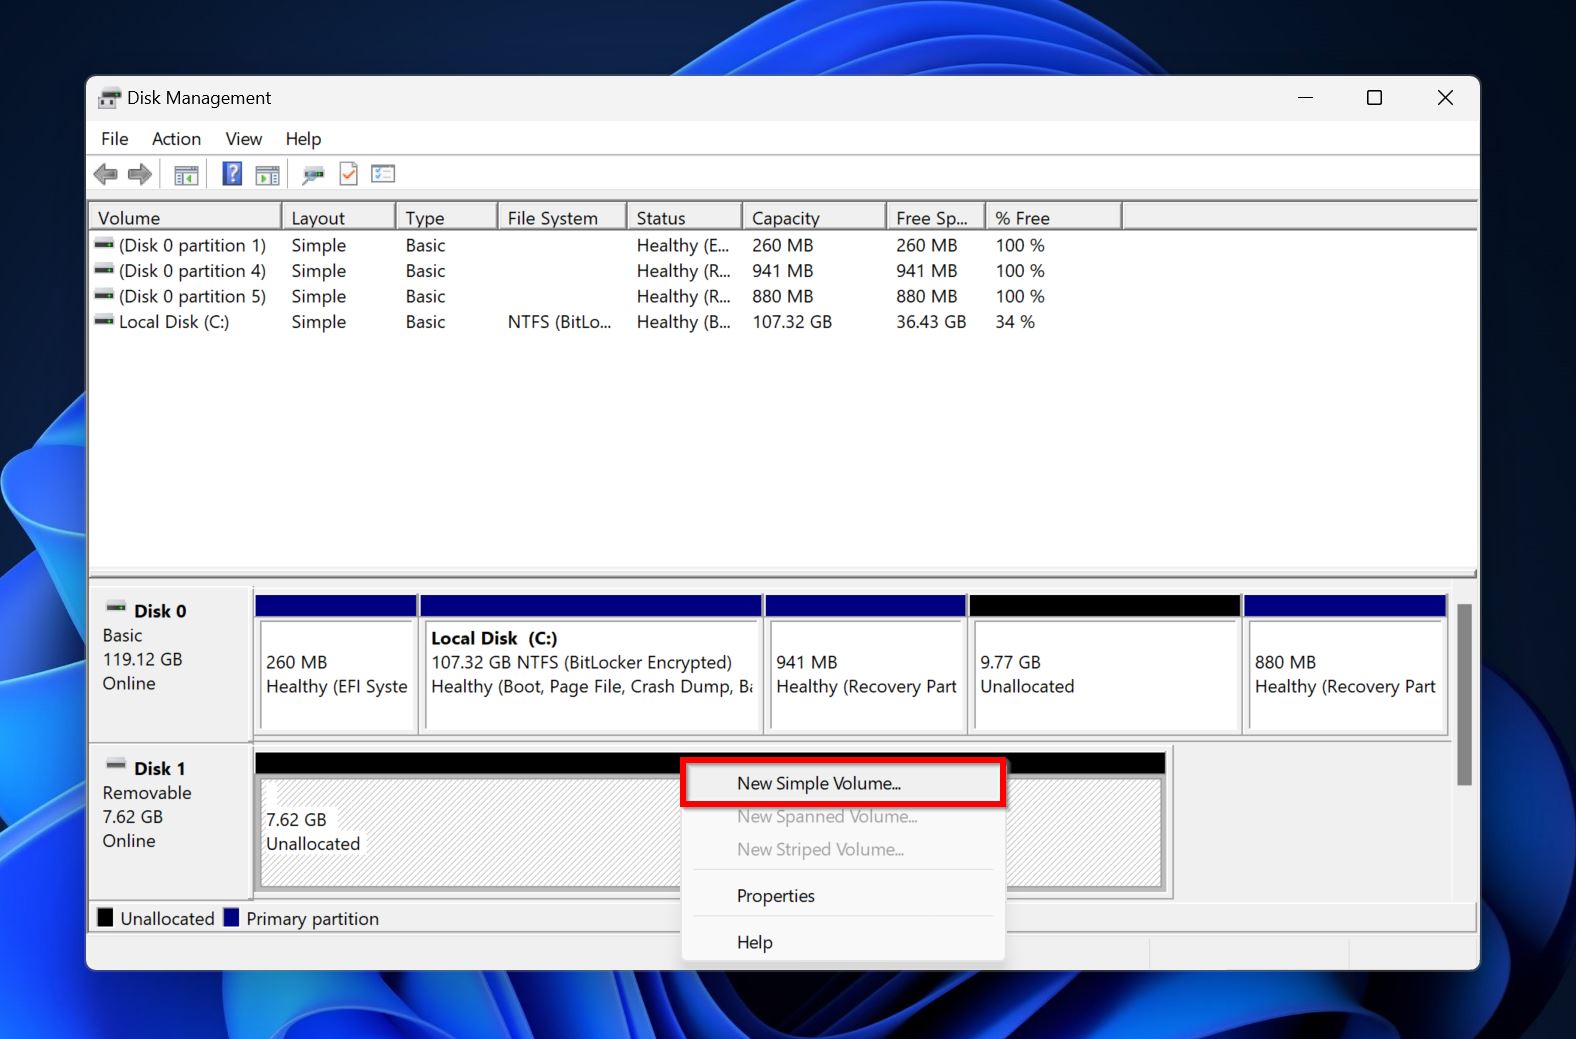 New Simple Volume option in Disk Management.